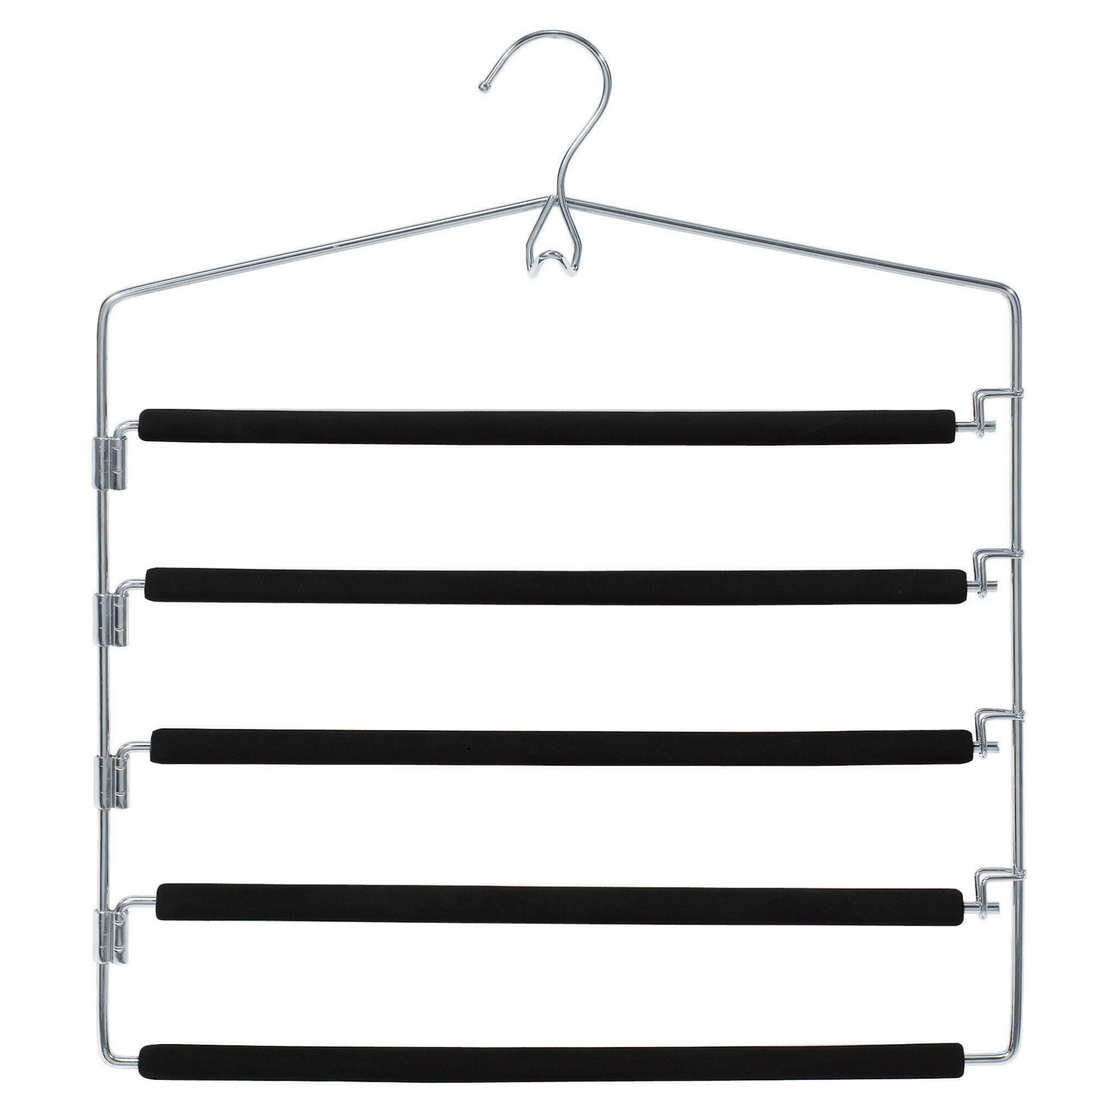 chrome tier pant hangers, 5 tier to hang upto hang 5 pants, slacks, trousers, metal pant hangers with non slip foam to prevent pants to slip